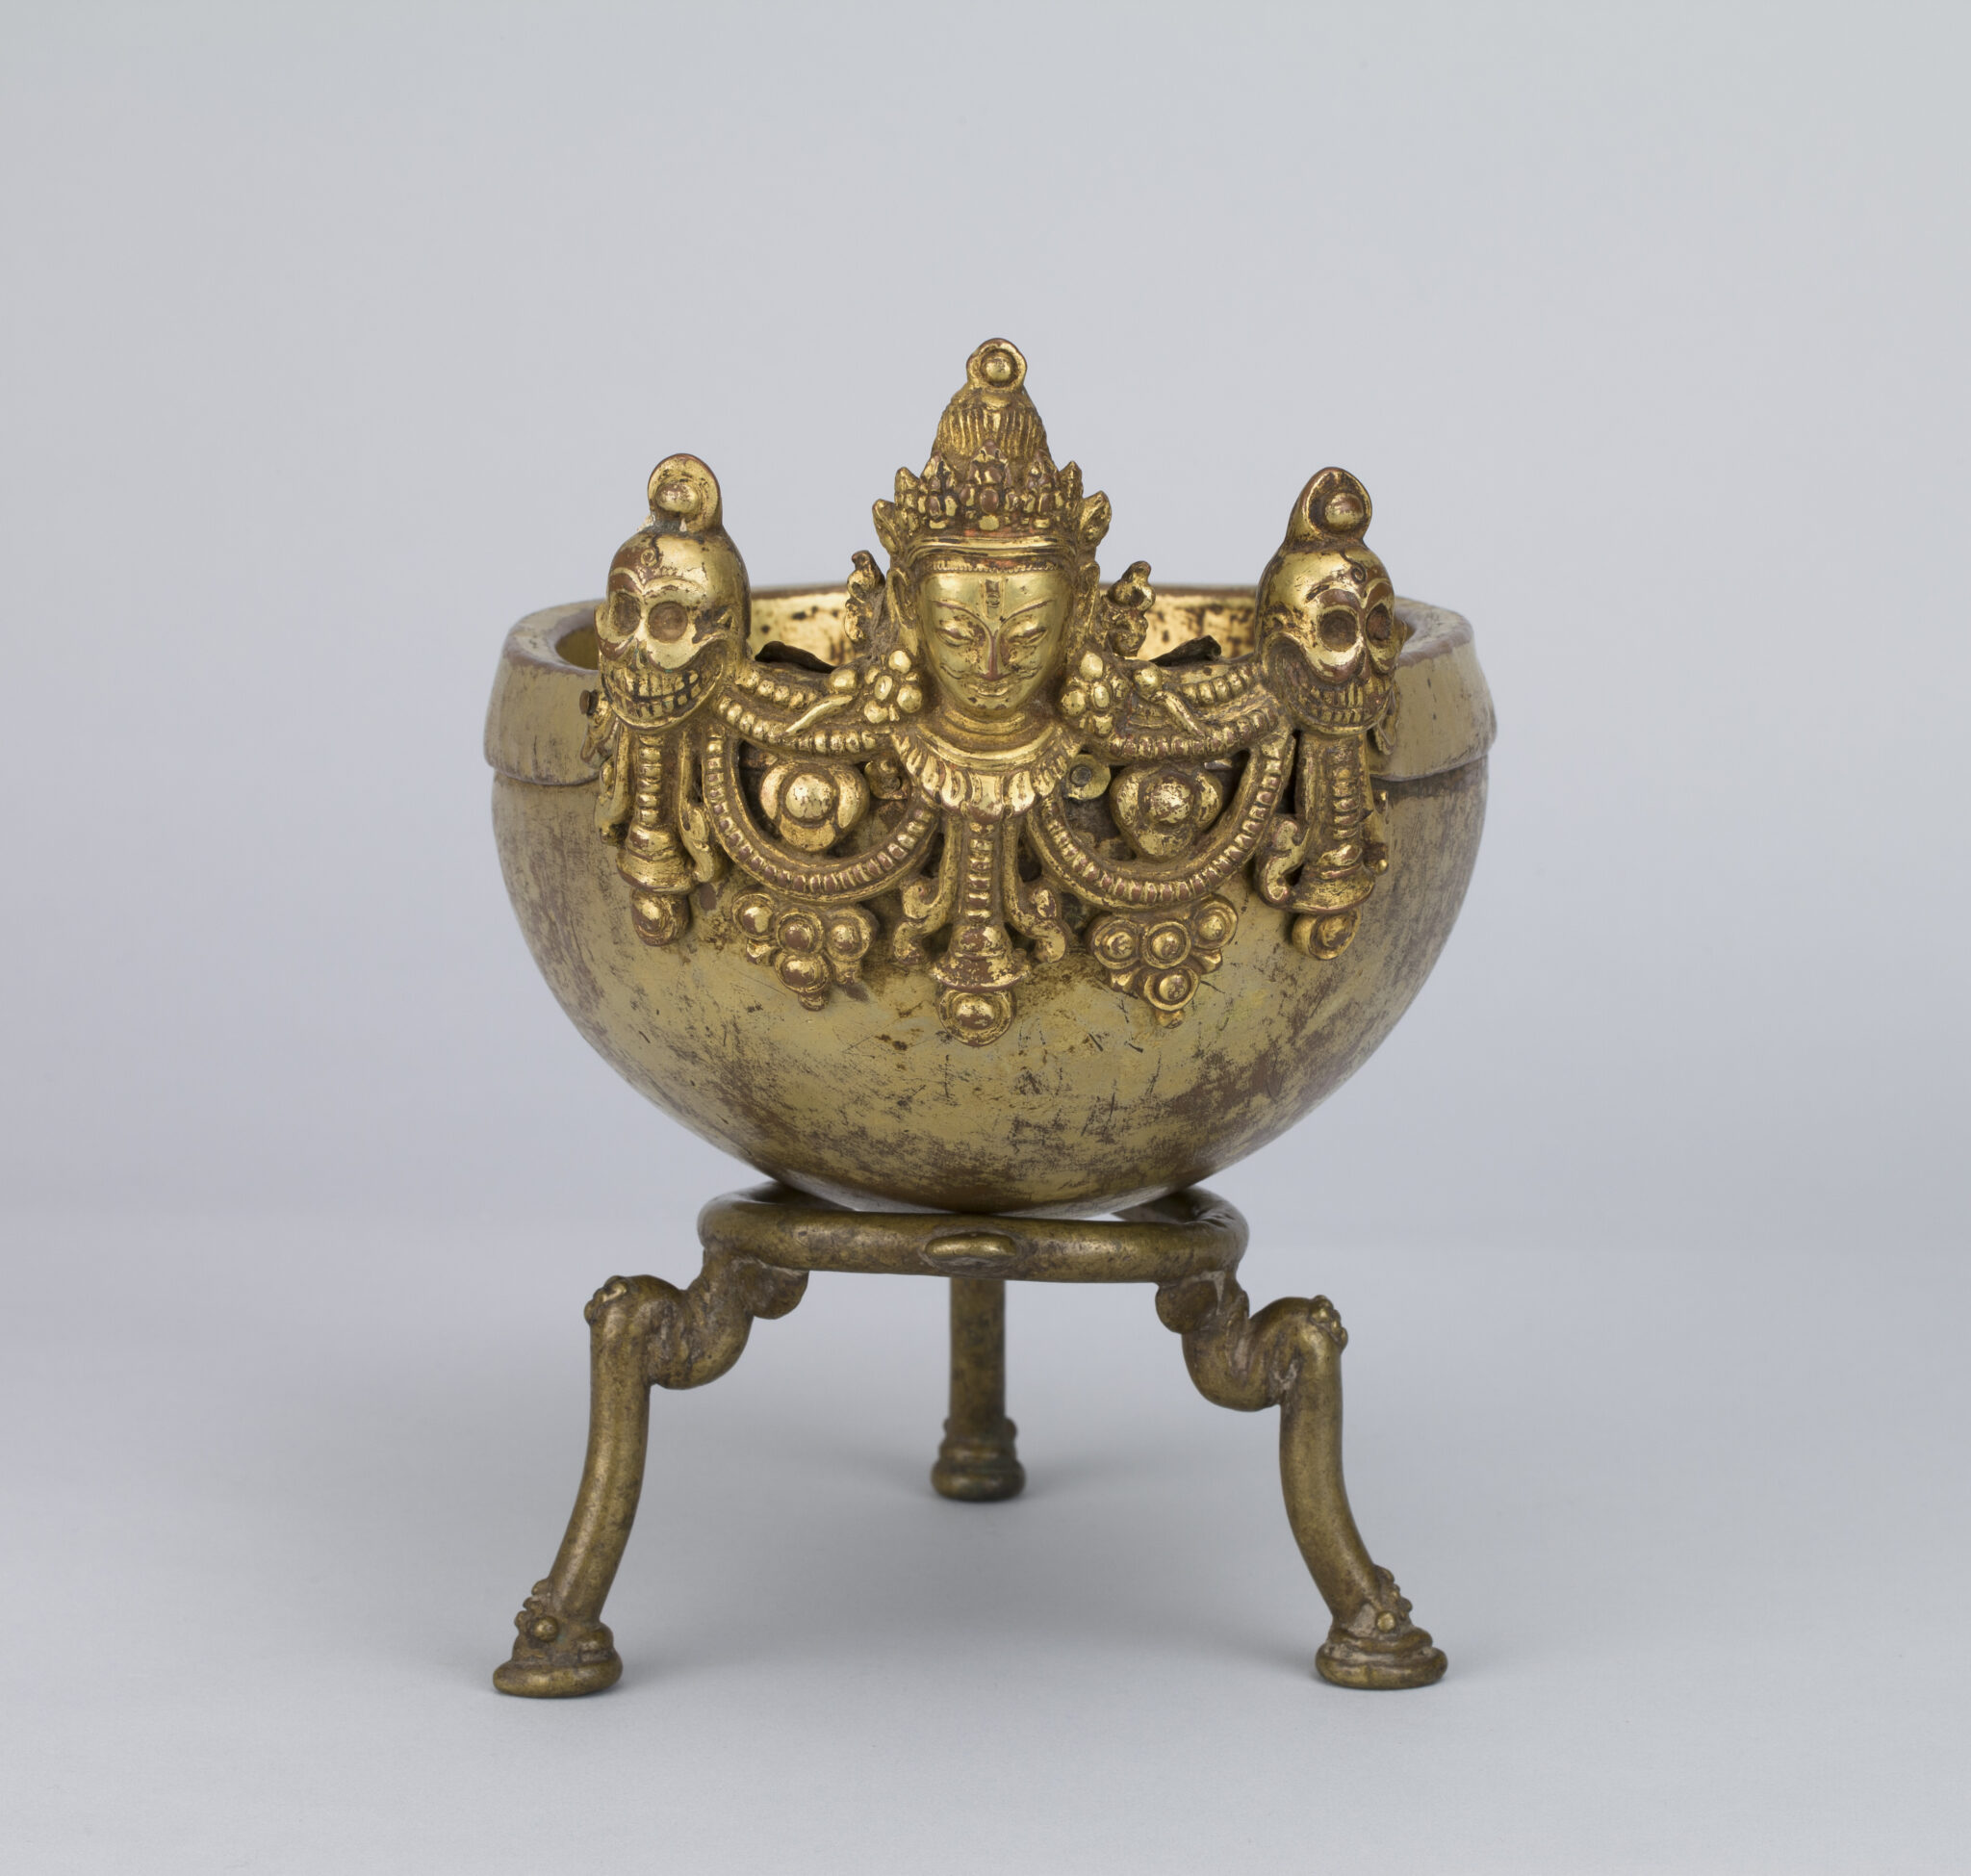 Cup made from human skull mounted on brass tripod, decorated with face of deity, skulls, and garland motif